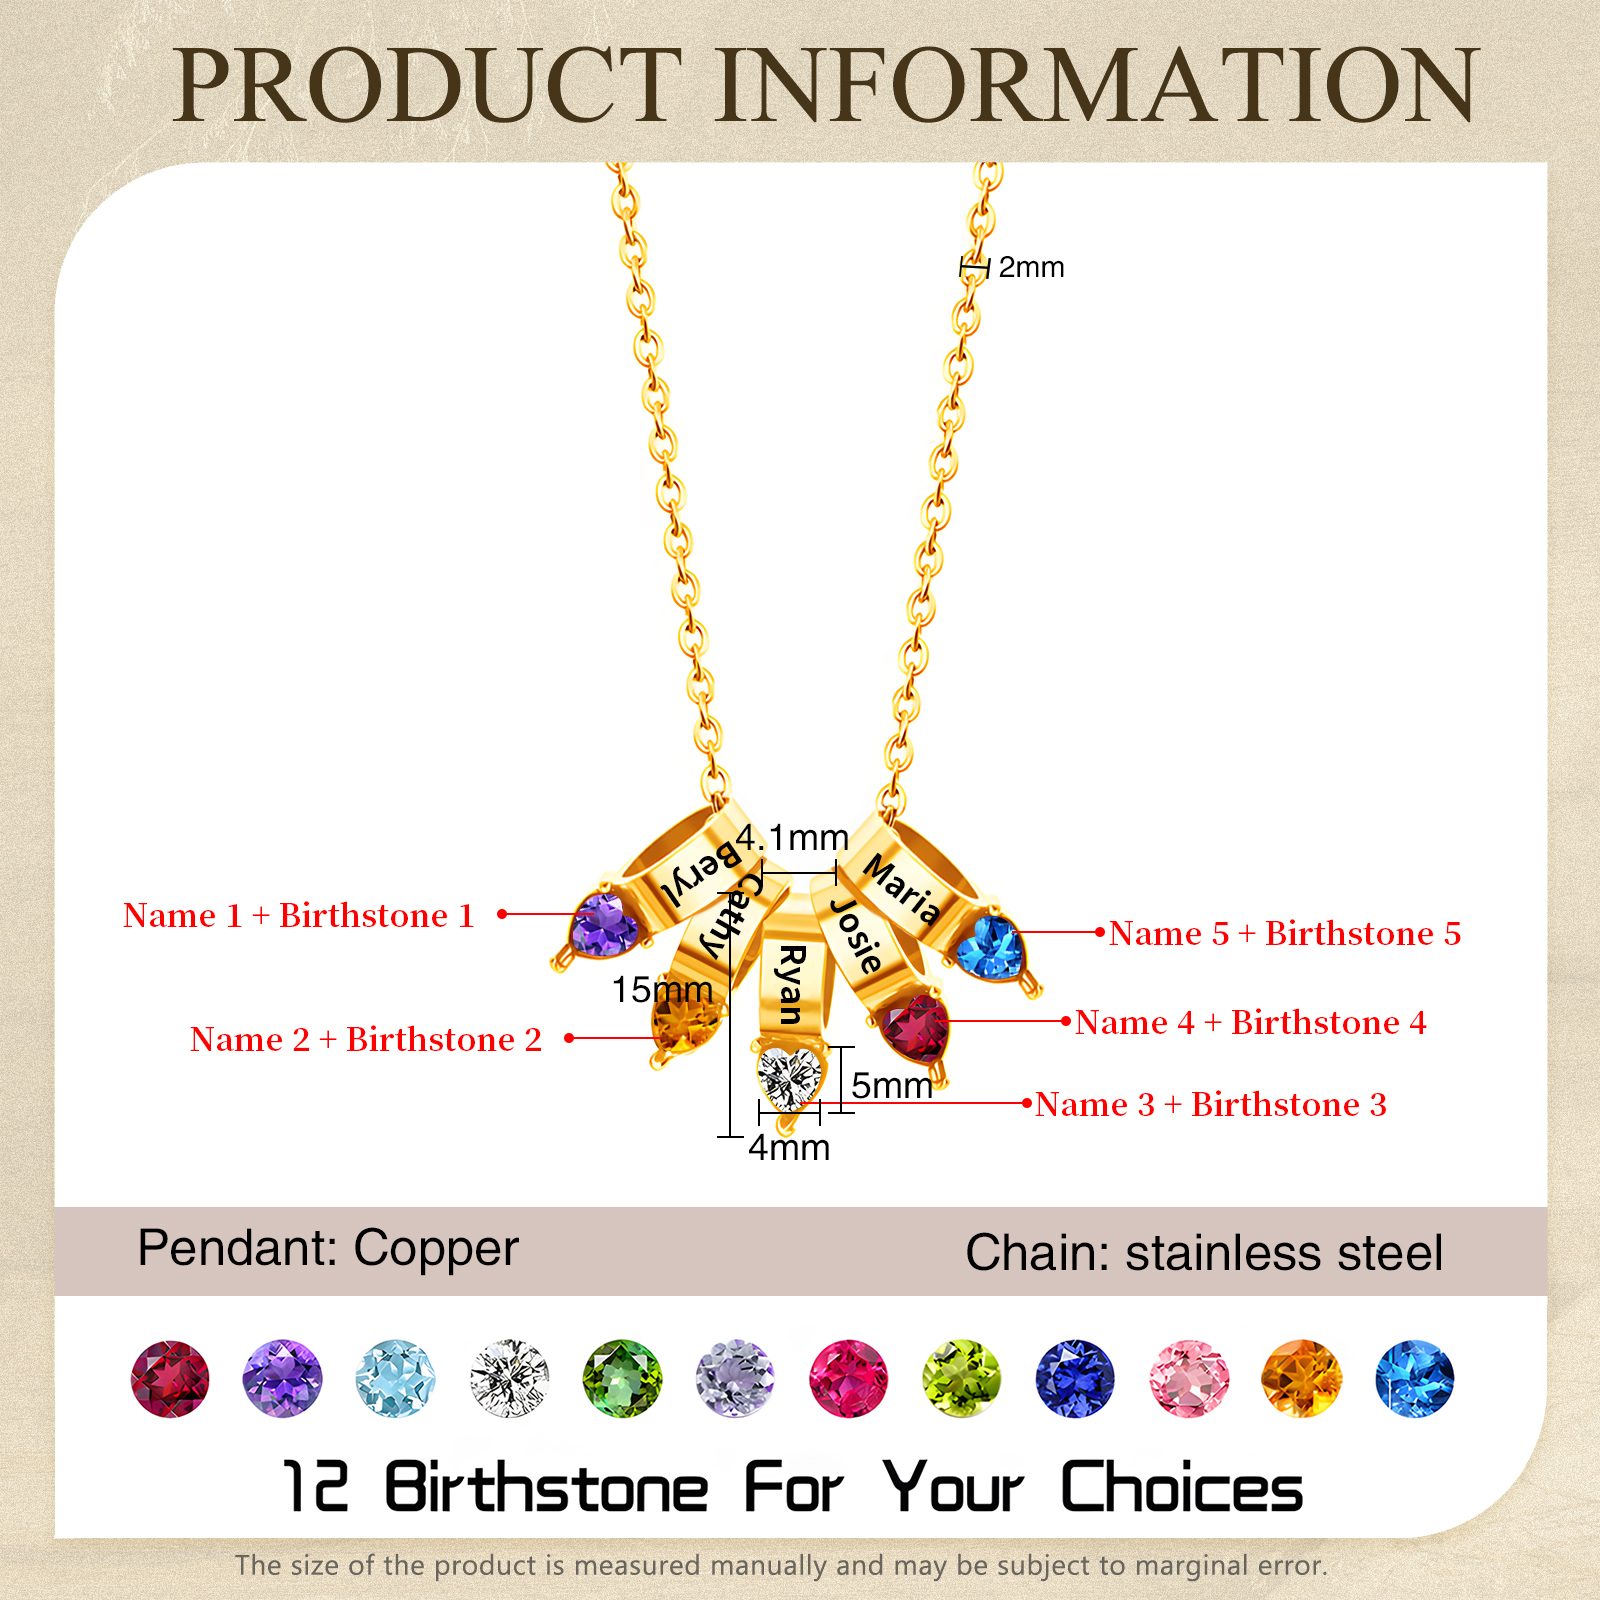 5 Names - Personalized Link Pendant Necklace with Customized Name and Birthstone Gift for Her